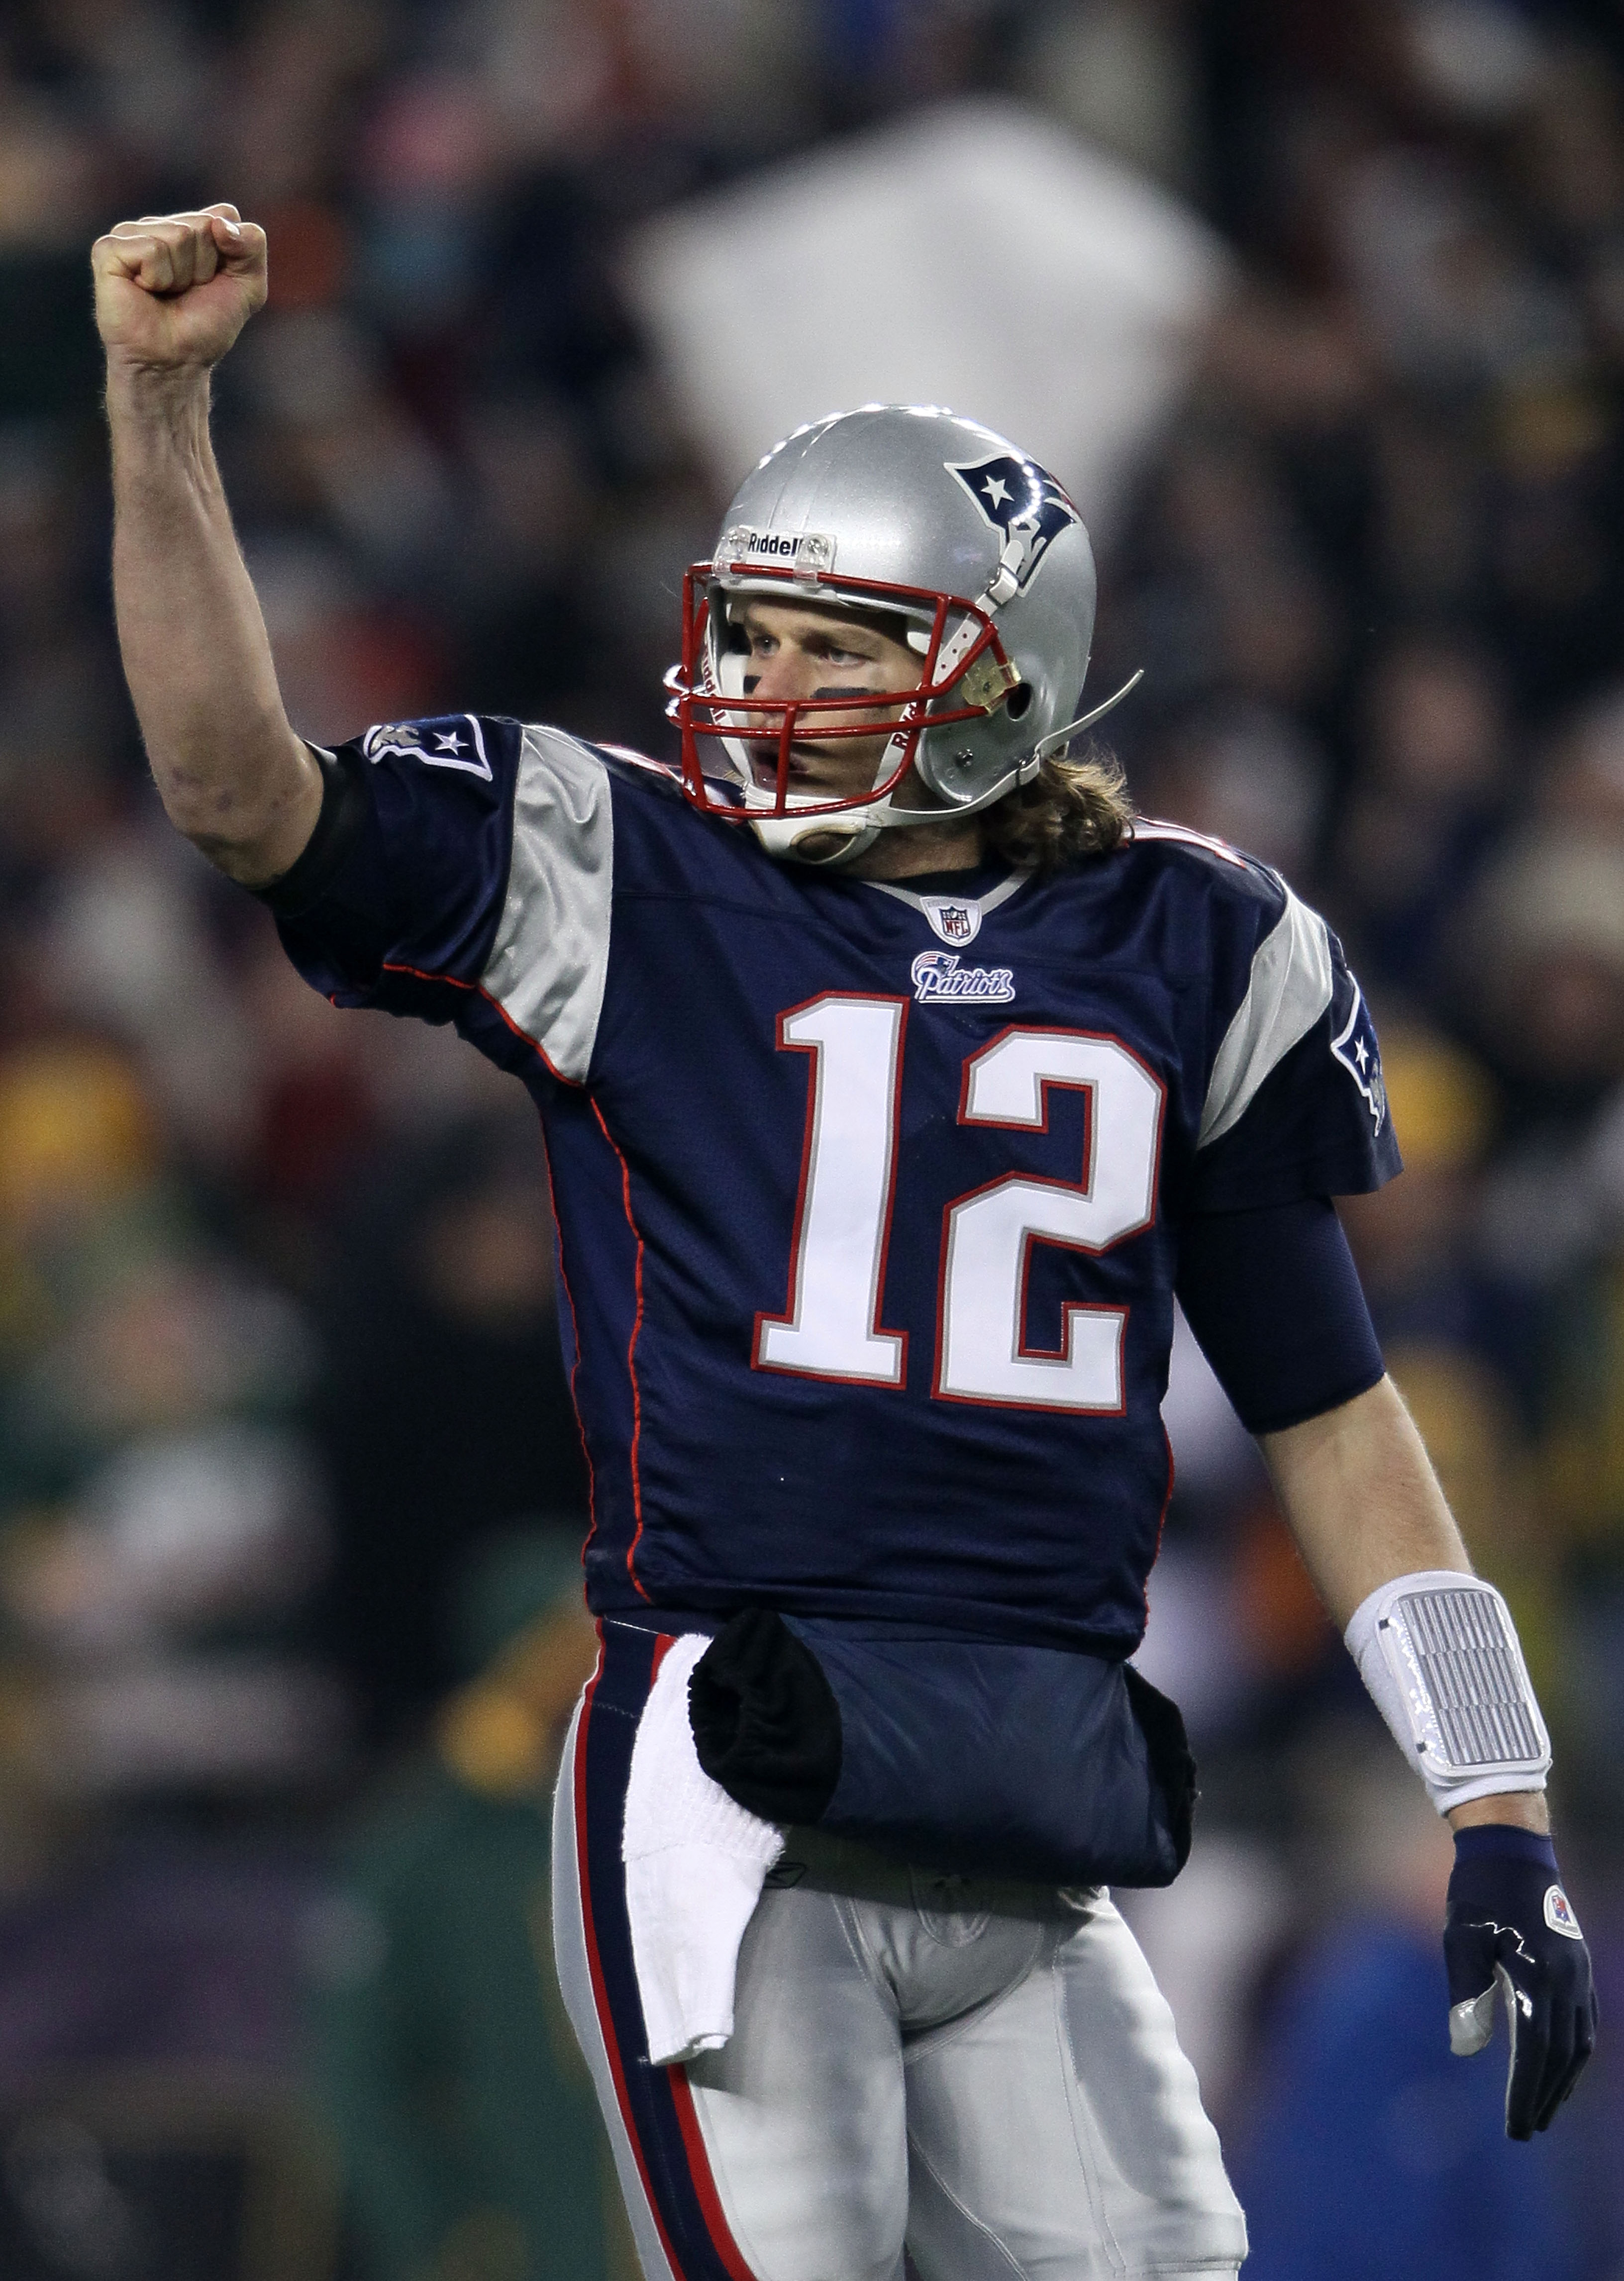 Highlights From Tom Brady and New England Patriots' Super Bowl